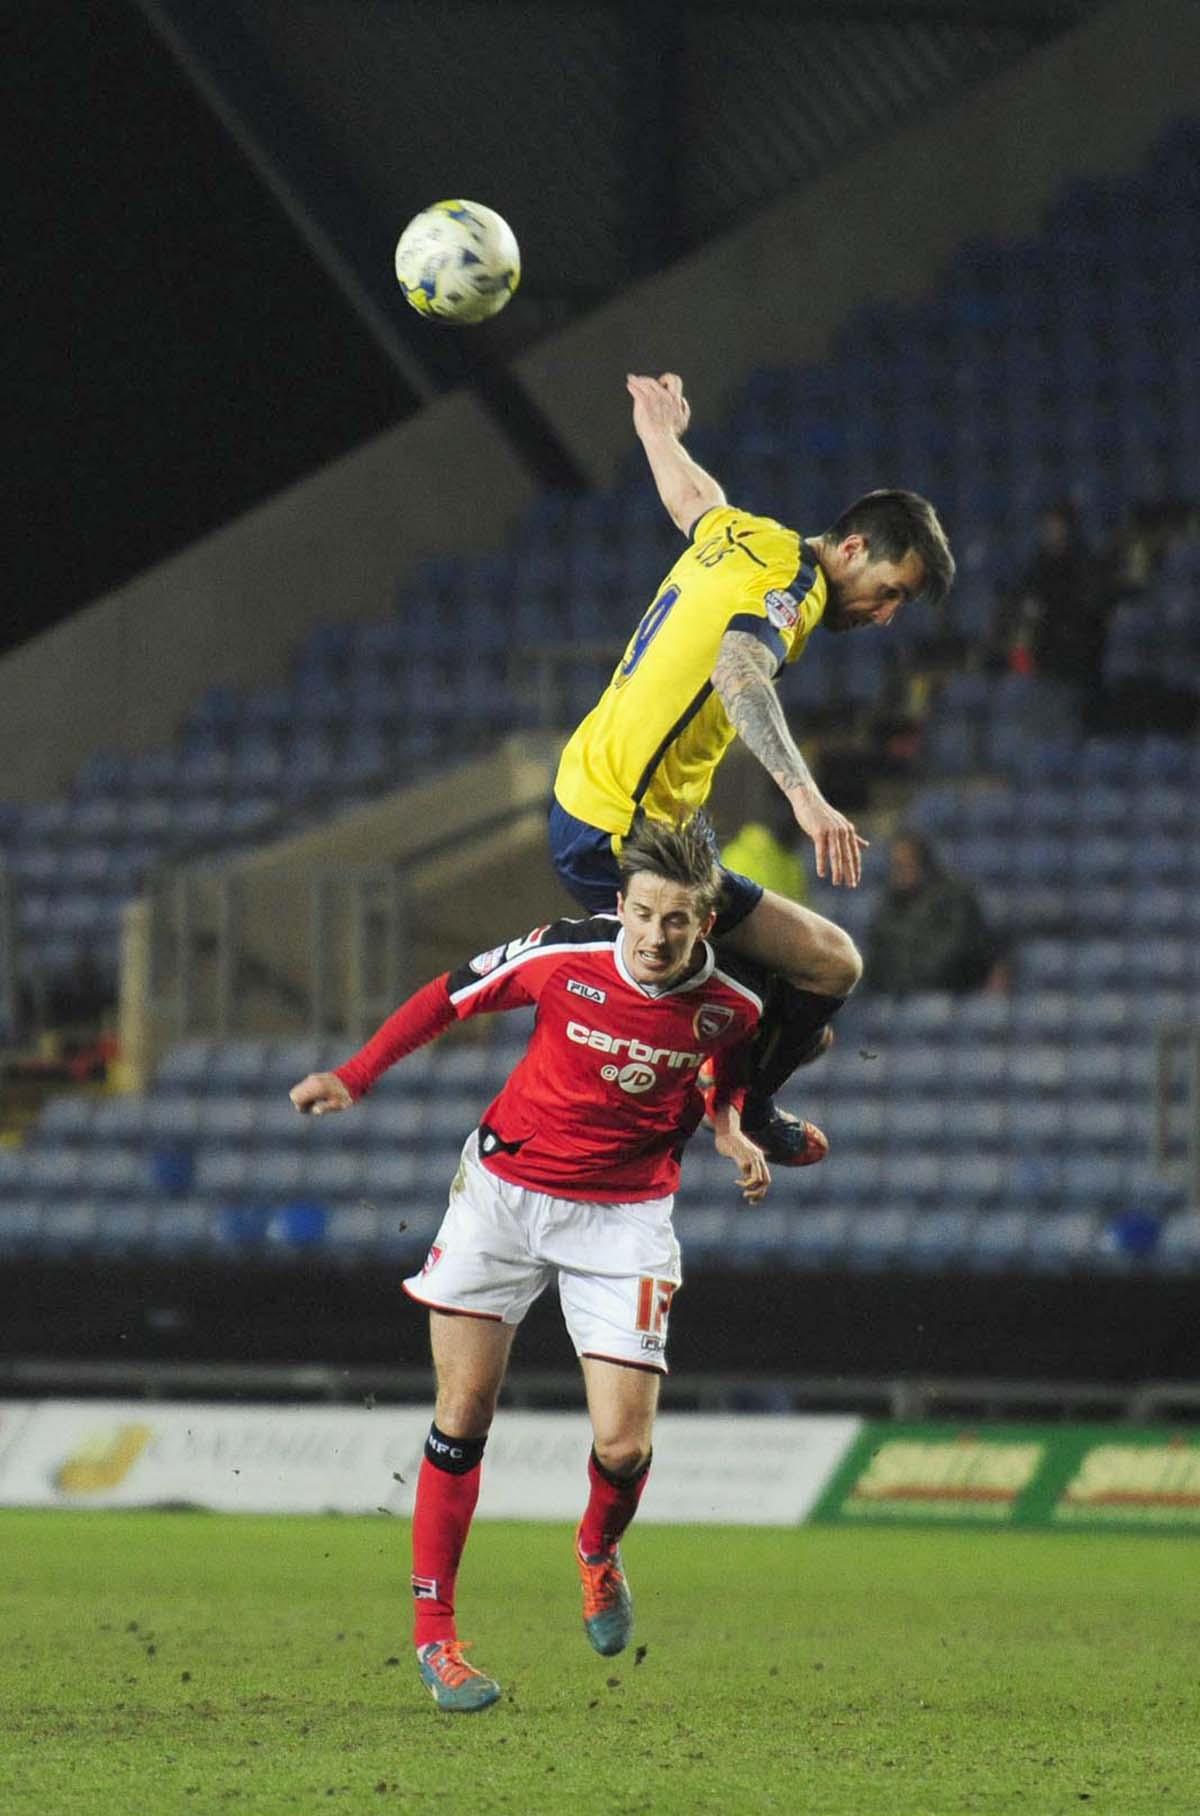 Oxford United v Morecambe at the Kassam Stadium IN PICTURES. Tuesday 3rd March 2015